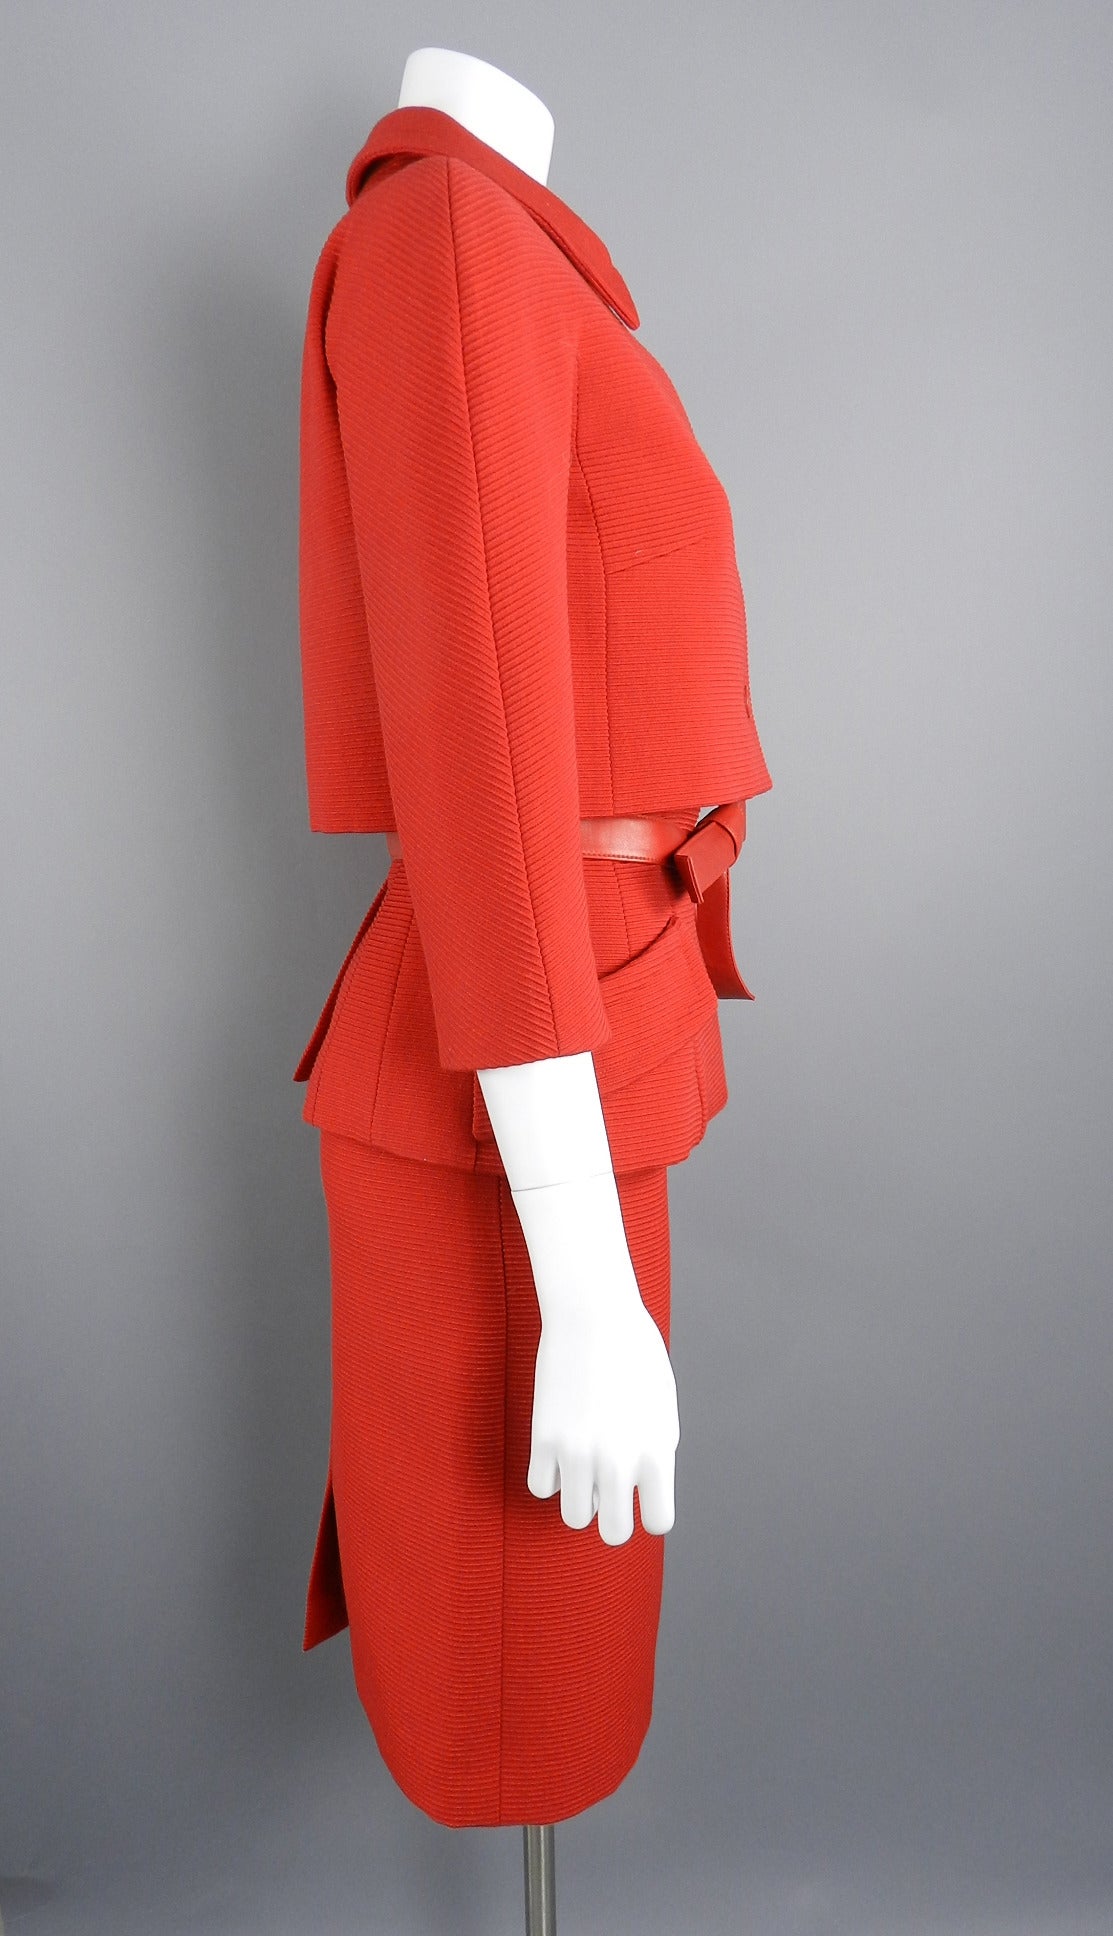 Christian Dior 1960's style skirt suit. Red ribbed wool fabric with matching soft lambskin sash belt. Excellent condition - worn once. Tagged size FR 38 but runs small and is best for a USA 4. Skirt waist is 26